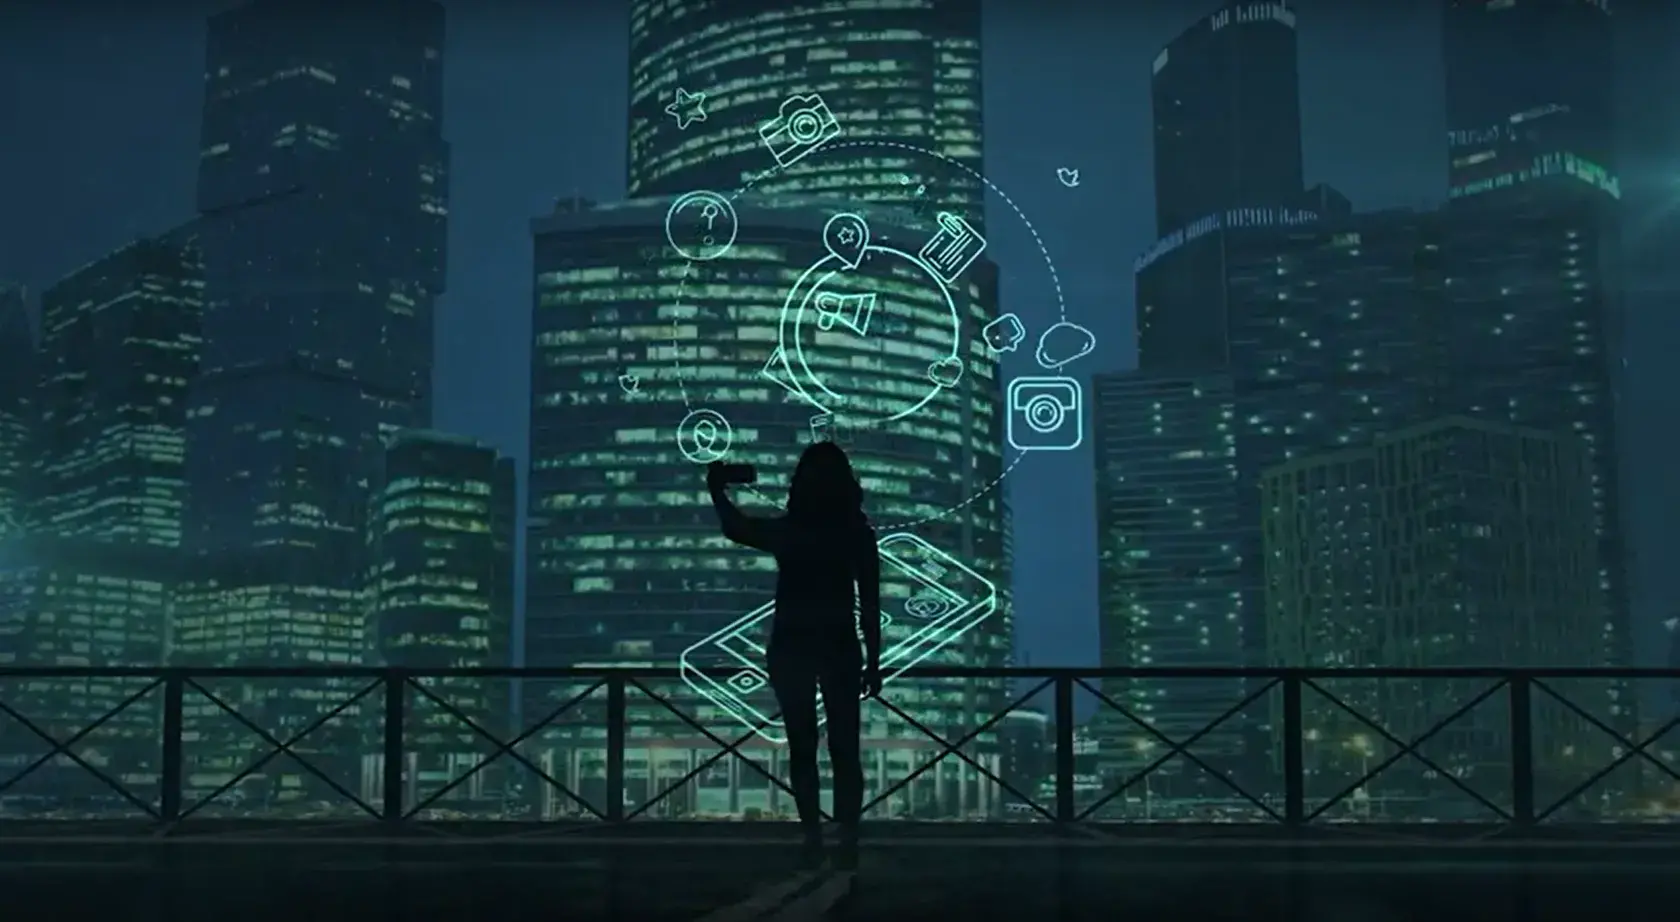 AUDREY concept image. Woman standing in front of a smart phone with different app icons, with a city backdrop.